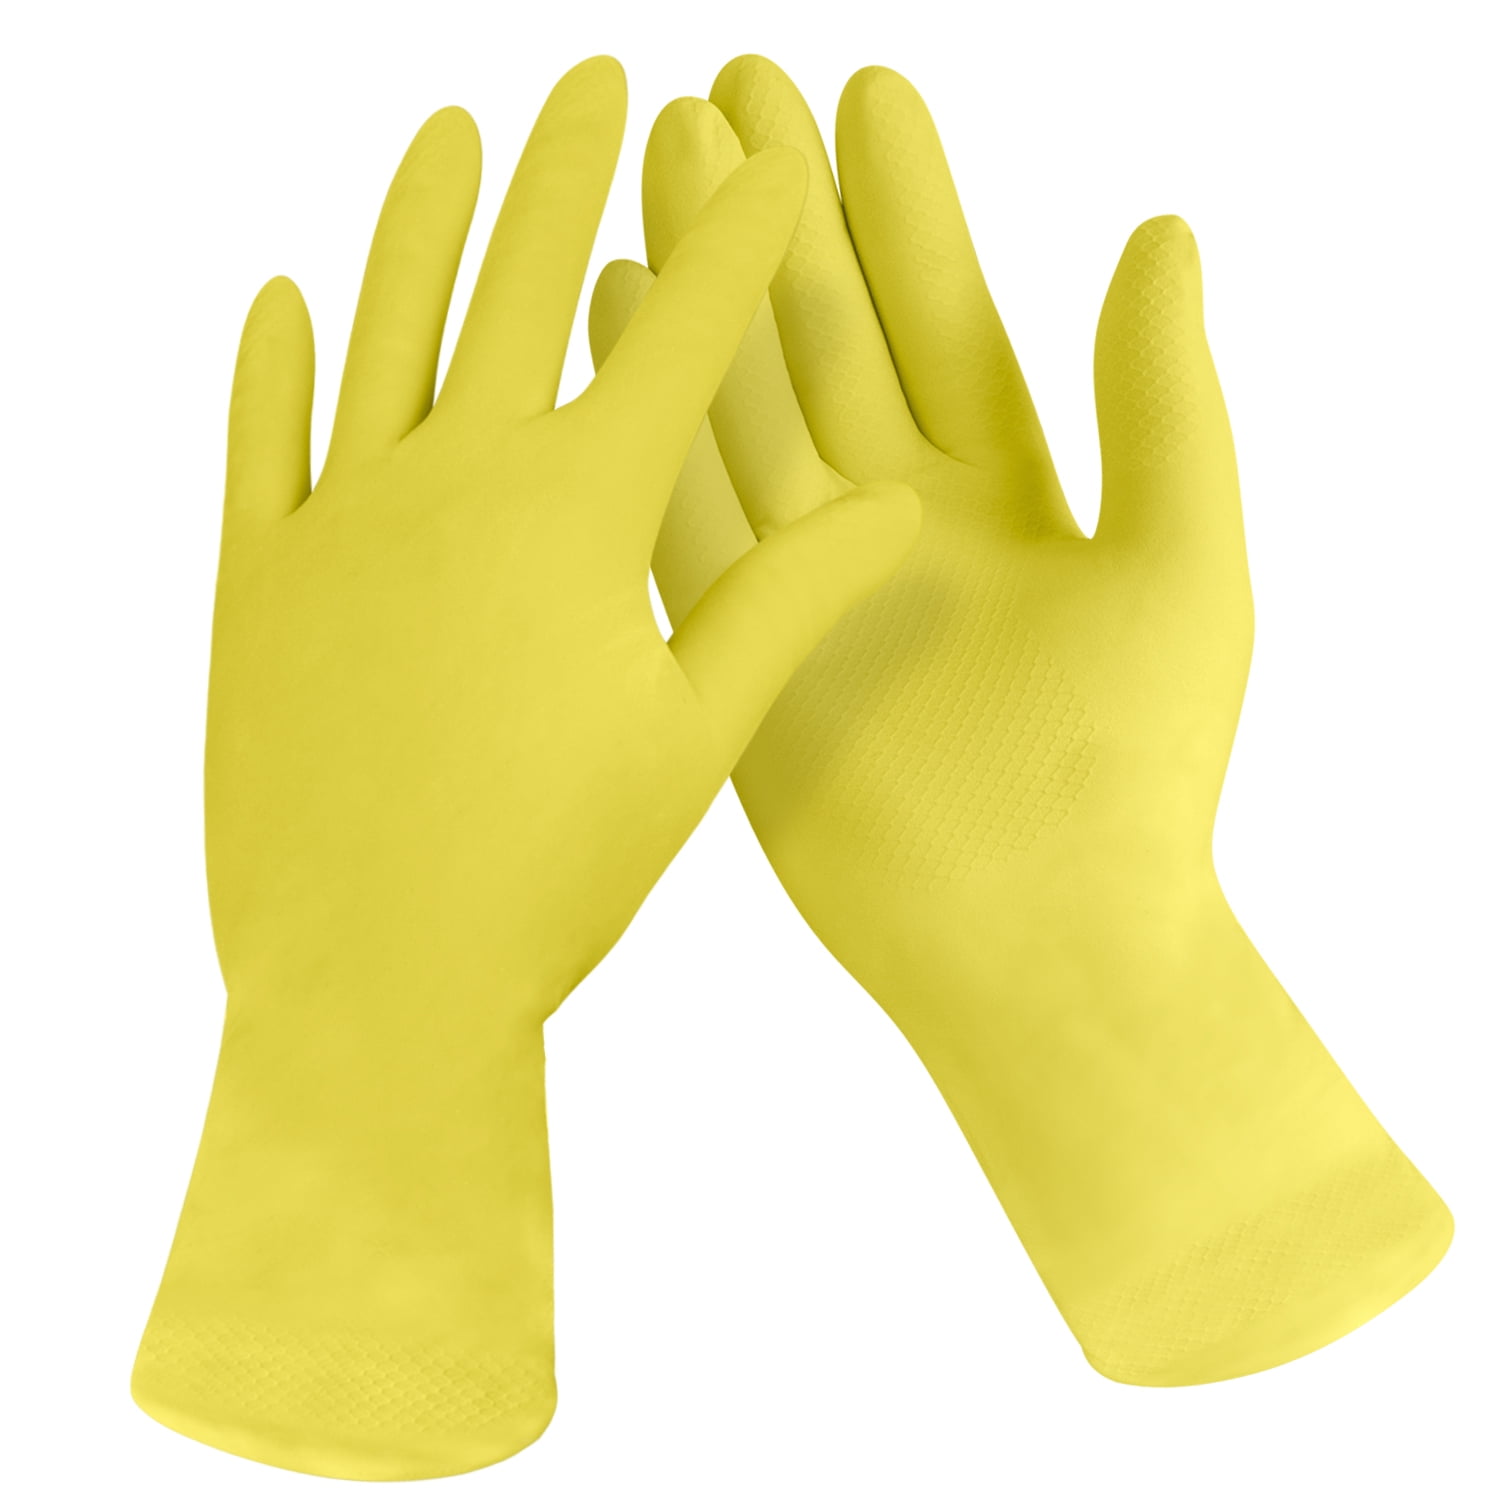 Kitchen Dish Washing Rubber Gloves Anti-slip Household Home Useful Cleaning Tool 